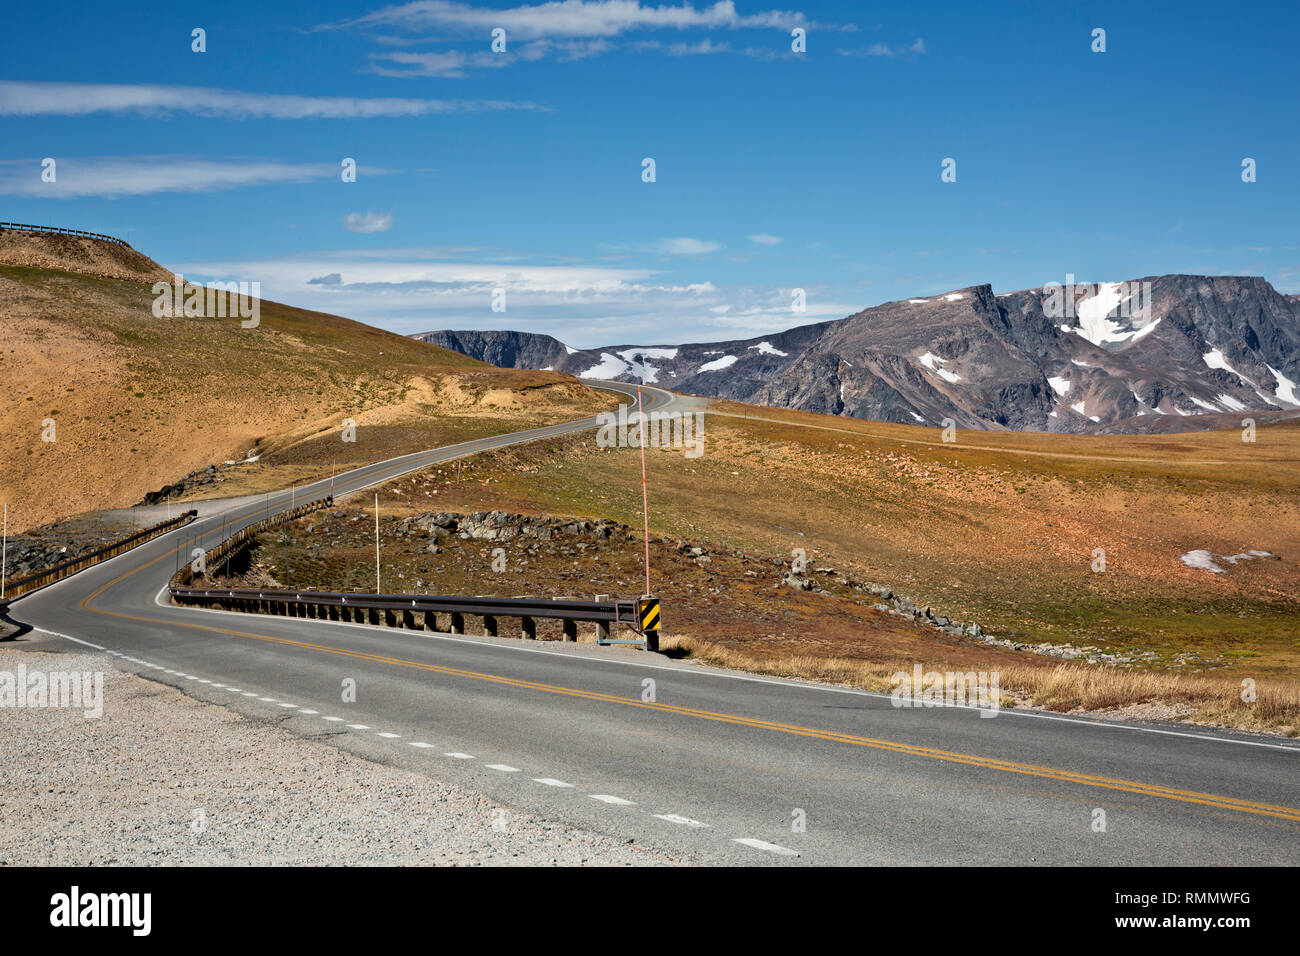 WY03736-00...WYOMING - The Beartooth Highway on the north side of Beartooth Pass Summit in the Shoshone National Forest. Stock Photo